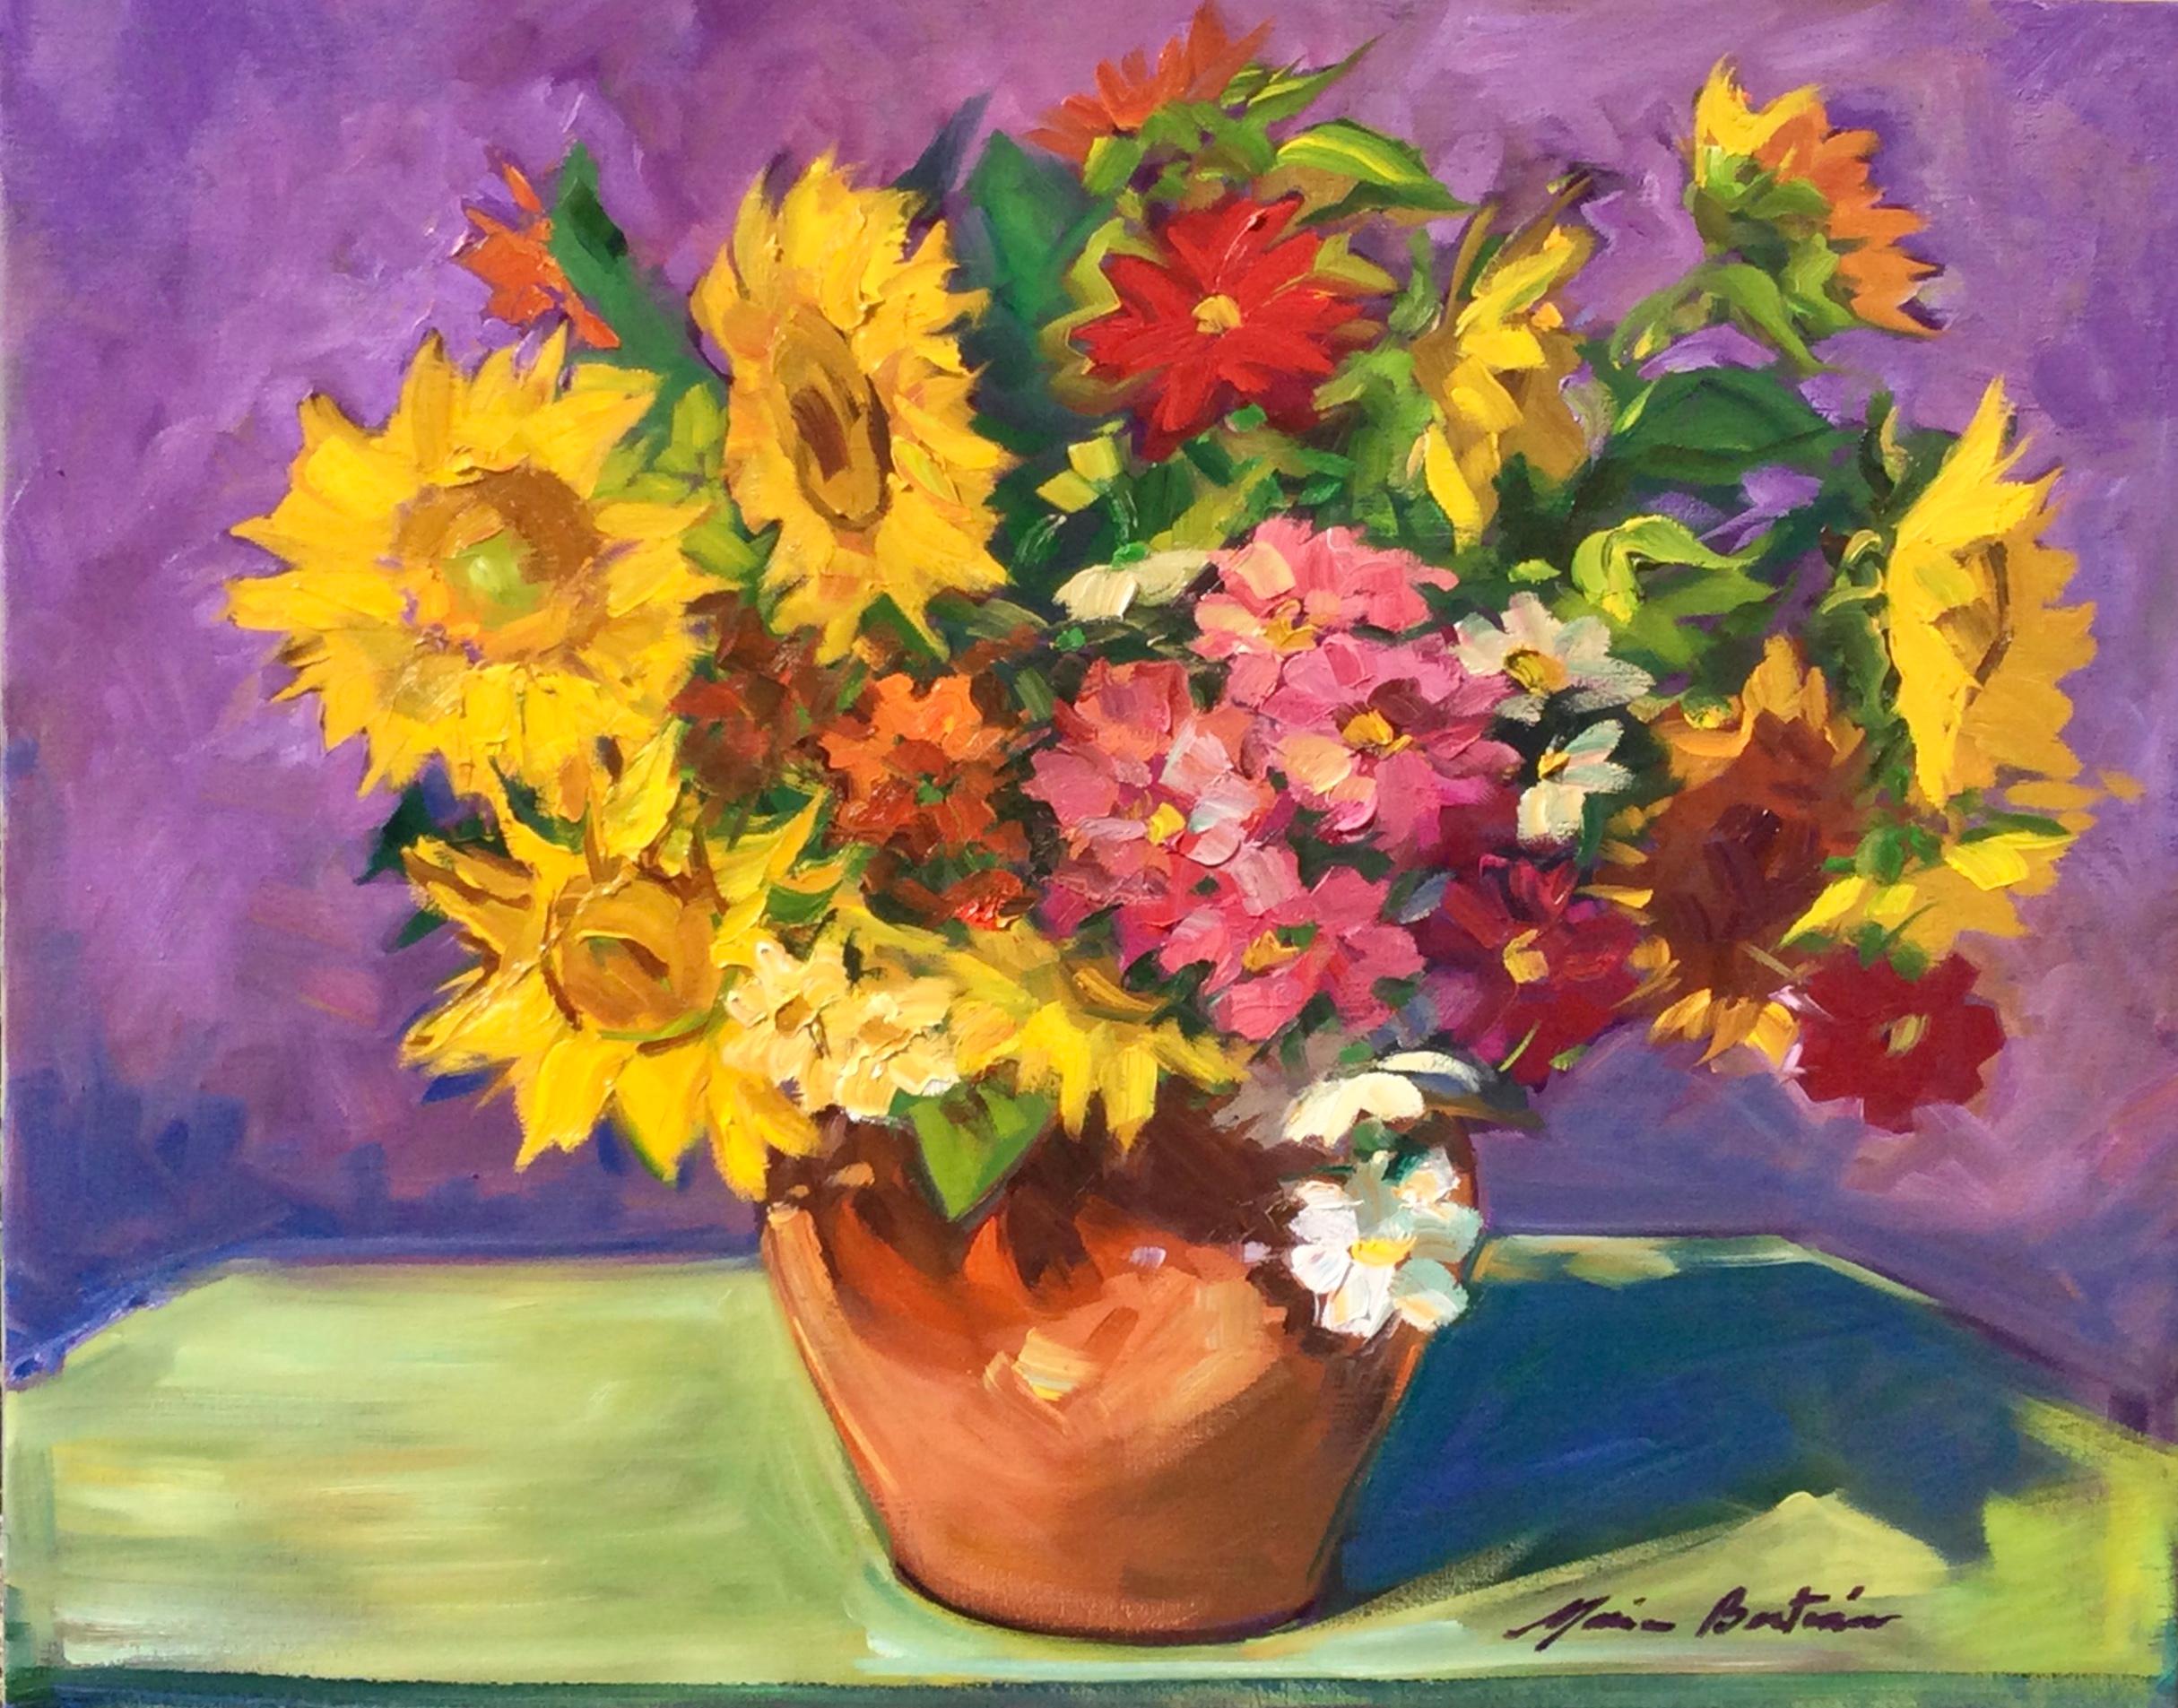 Maria Bertrán Still-Life Painting - "Sunflowers and Red Cosmos" Contemporary Impressionist Still Life Oil